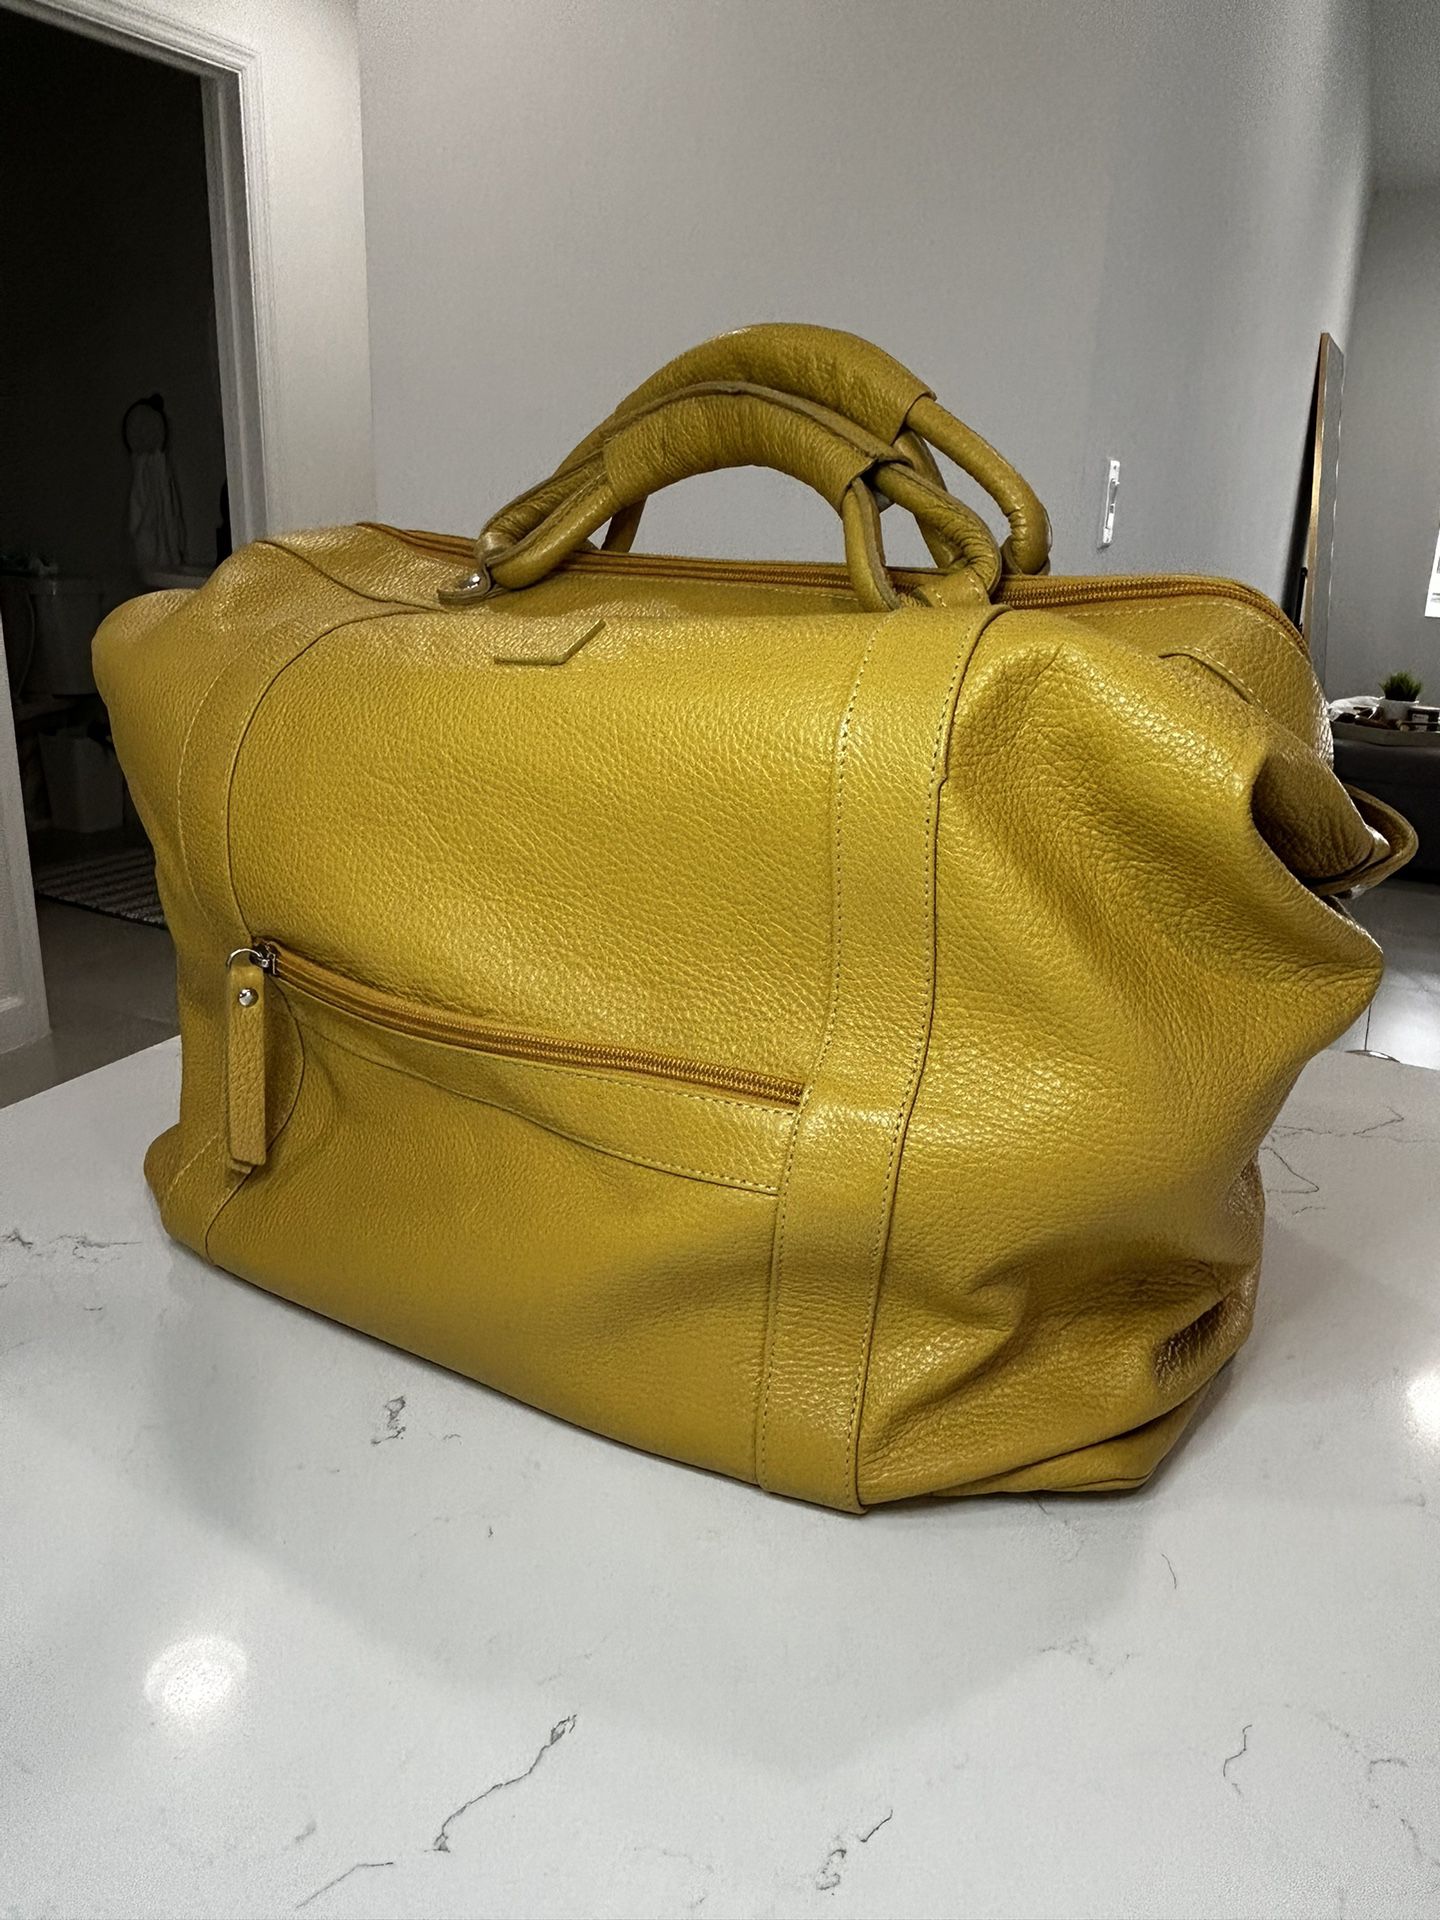 Large Tote Duffle Yellow leather authentic bag made in Italy travel  